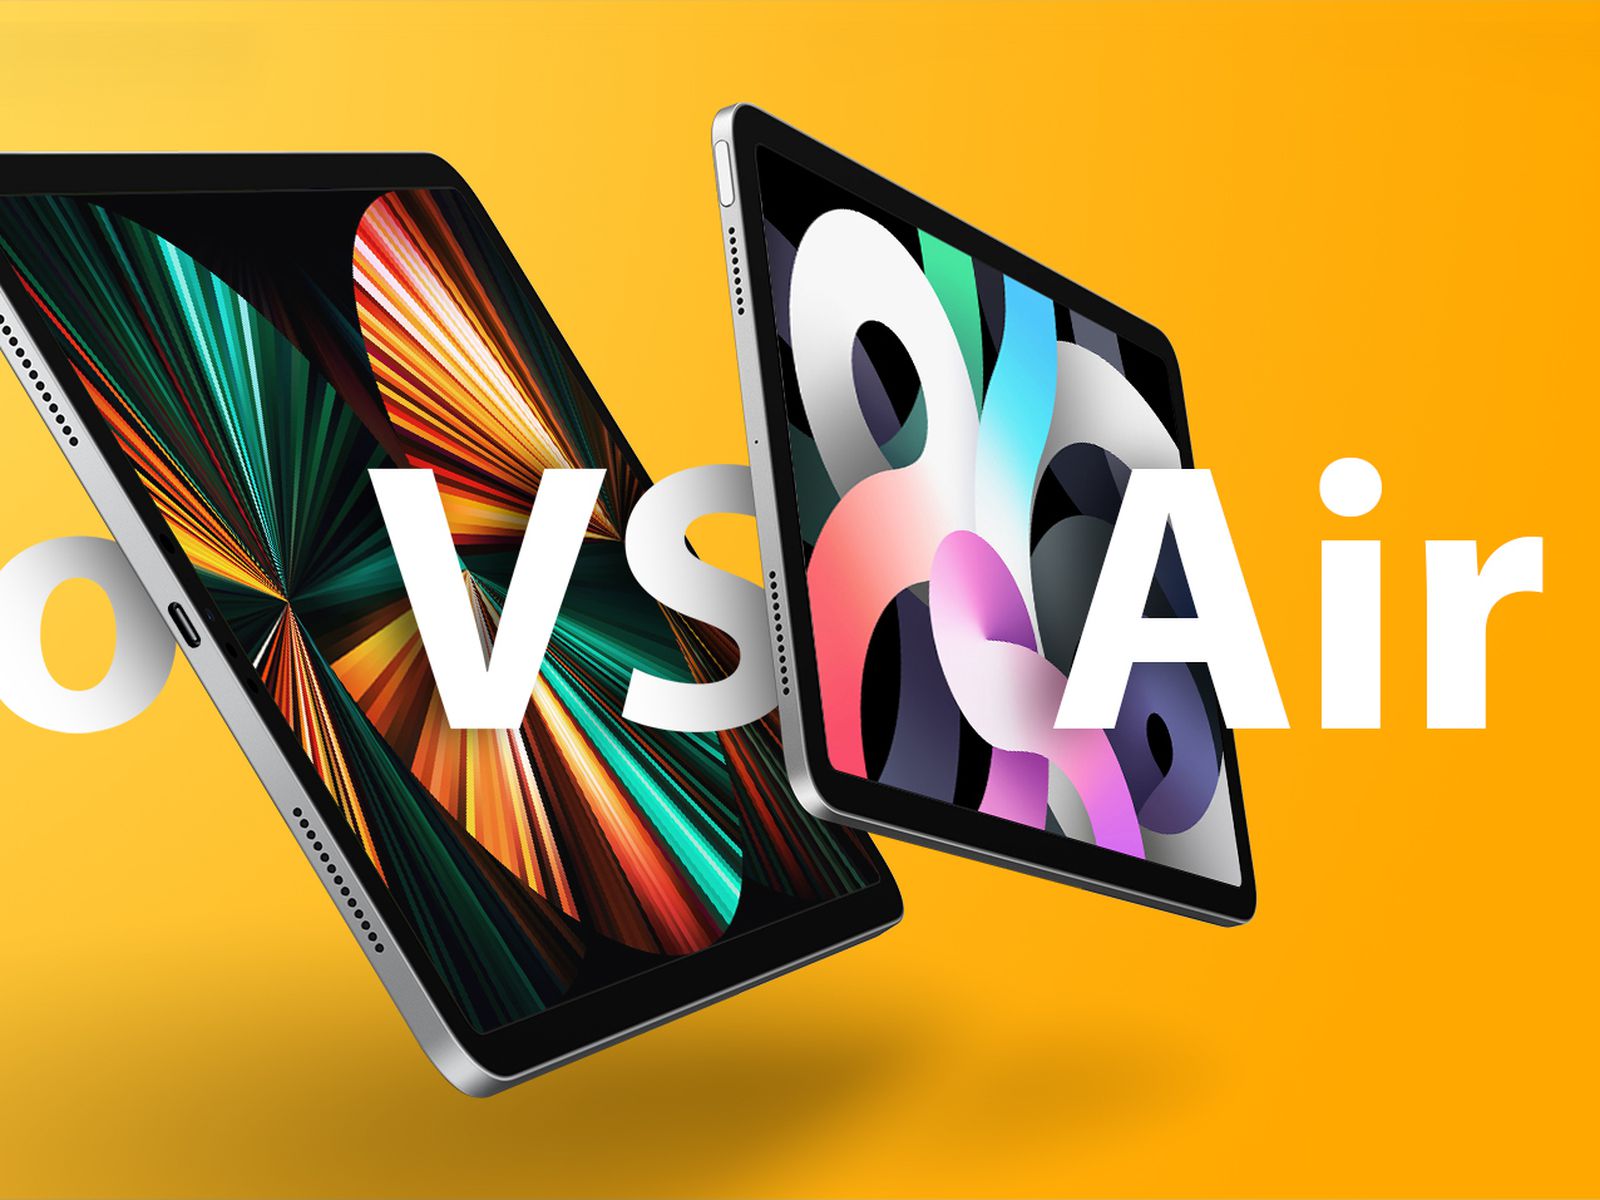 Ipad pro m1 vs ipad air in which shop can you buy the following